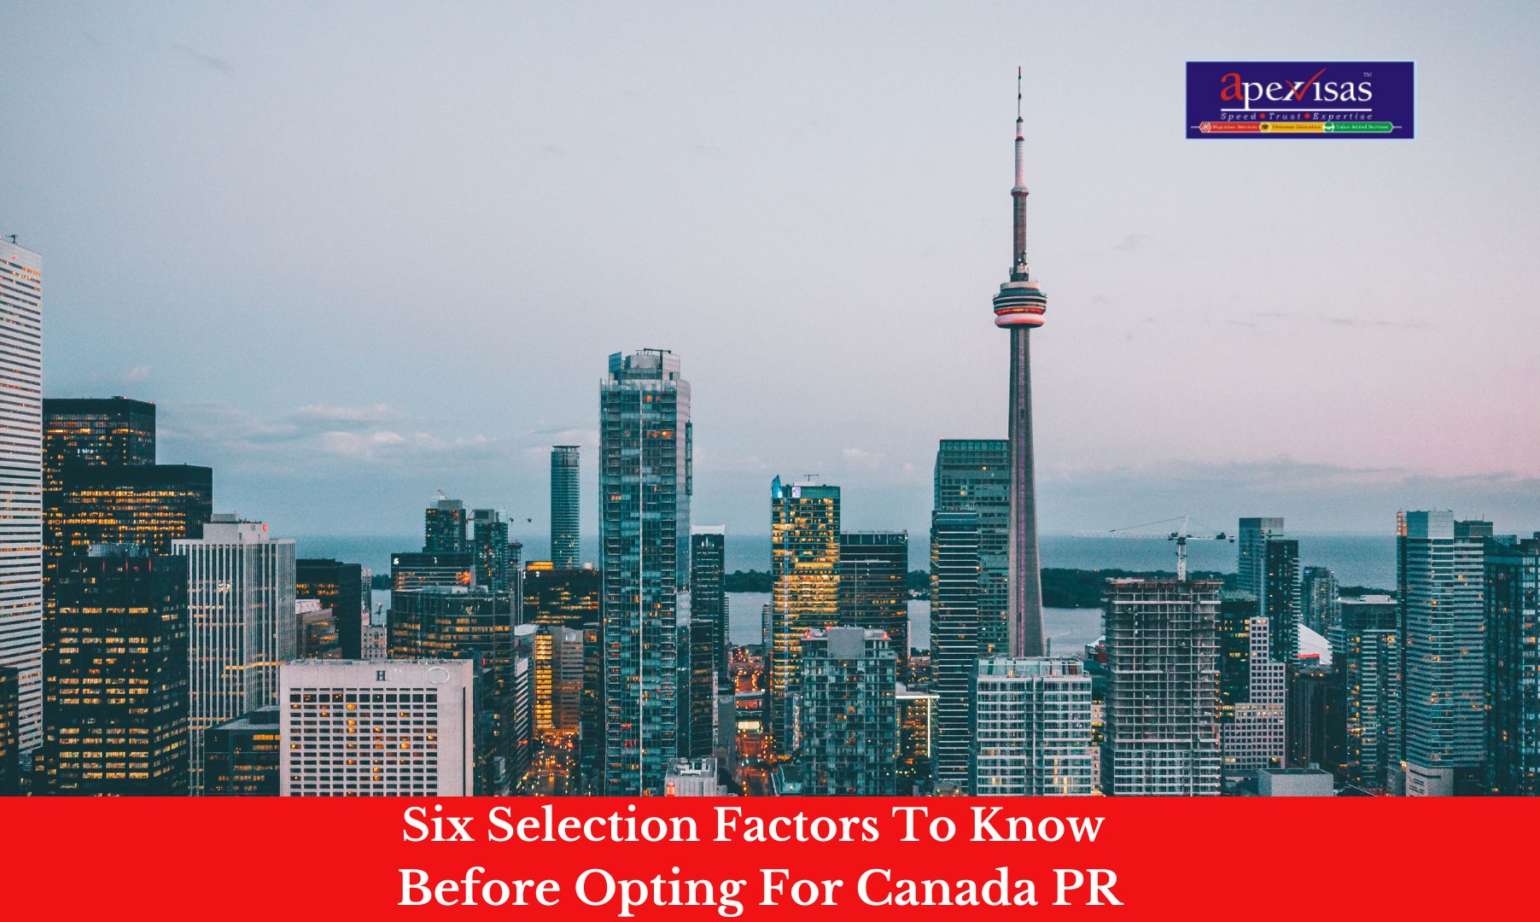 Six Selection Factors One Needs To Know Before Opting For Canada PR